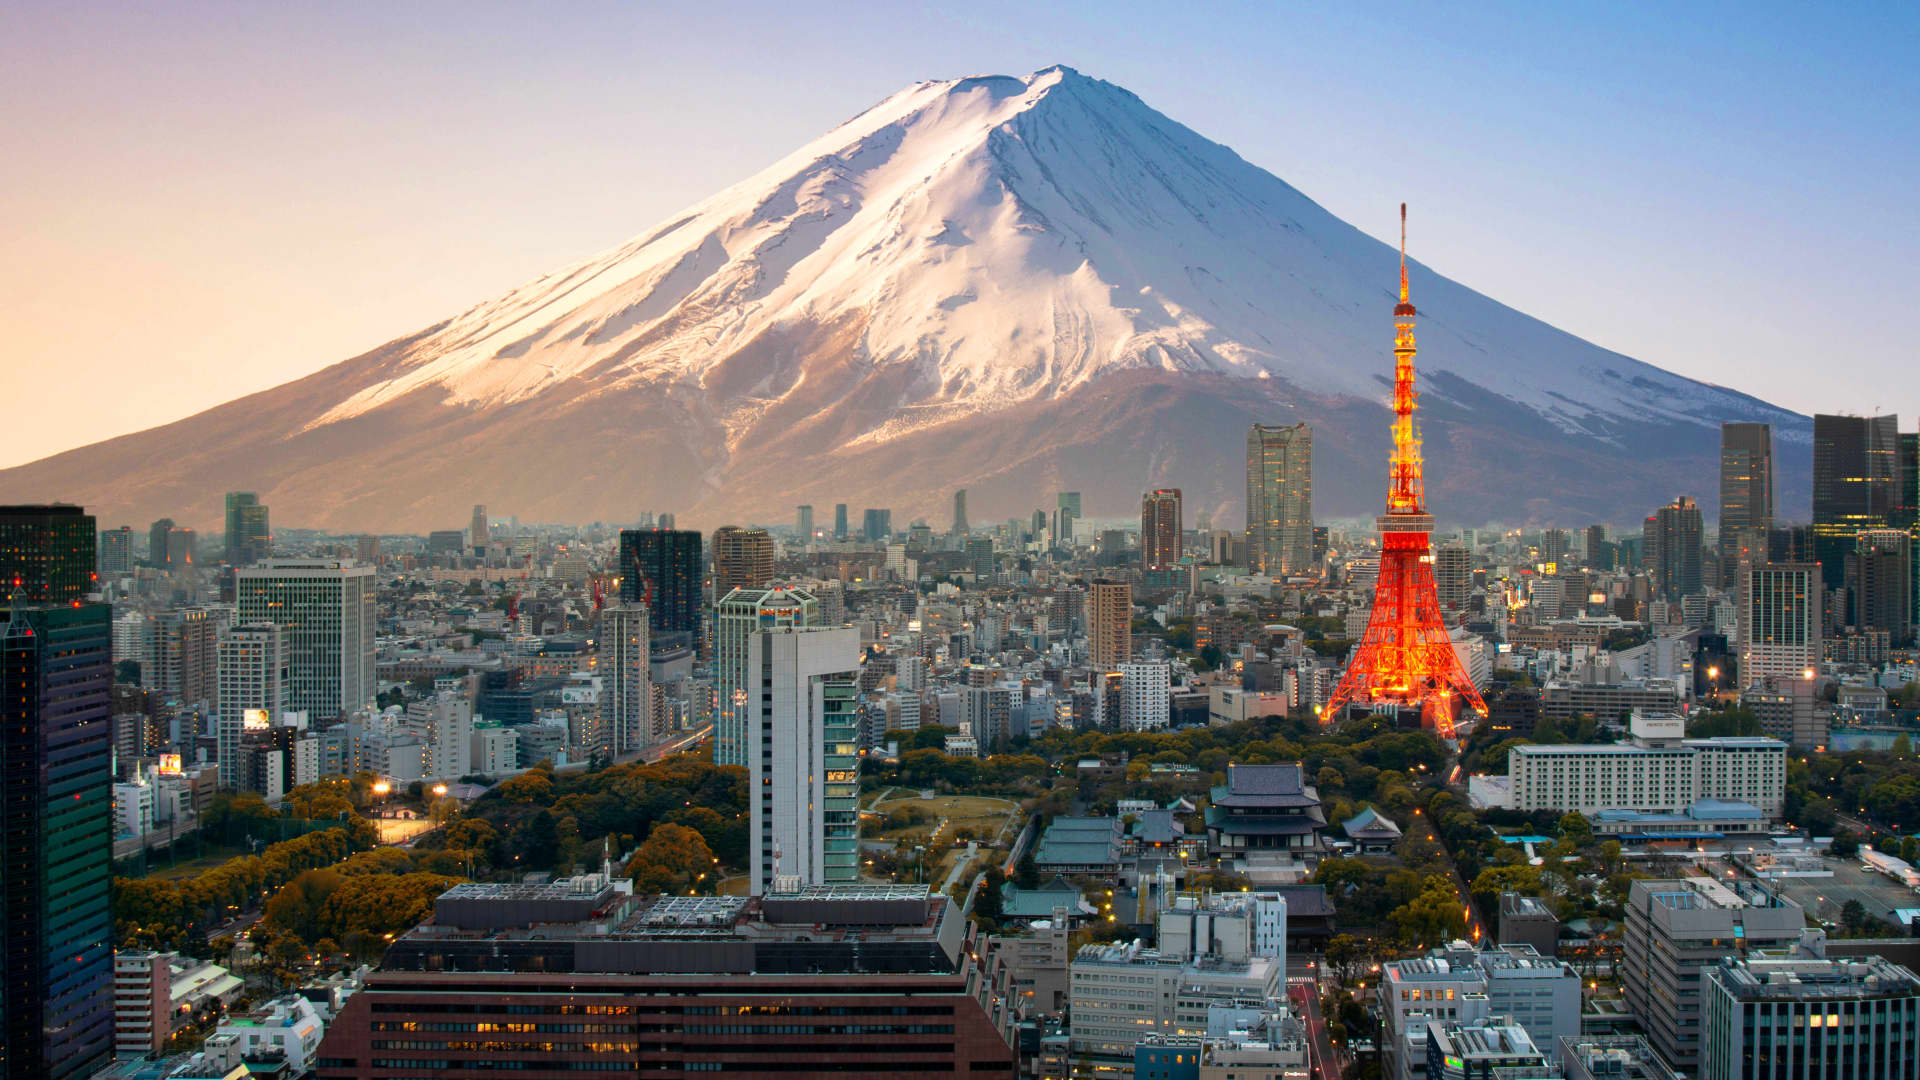 Tokyo, Japan ranked as the second wealthiest city in the world, according to Henley & Partners' 2023 report.